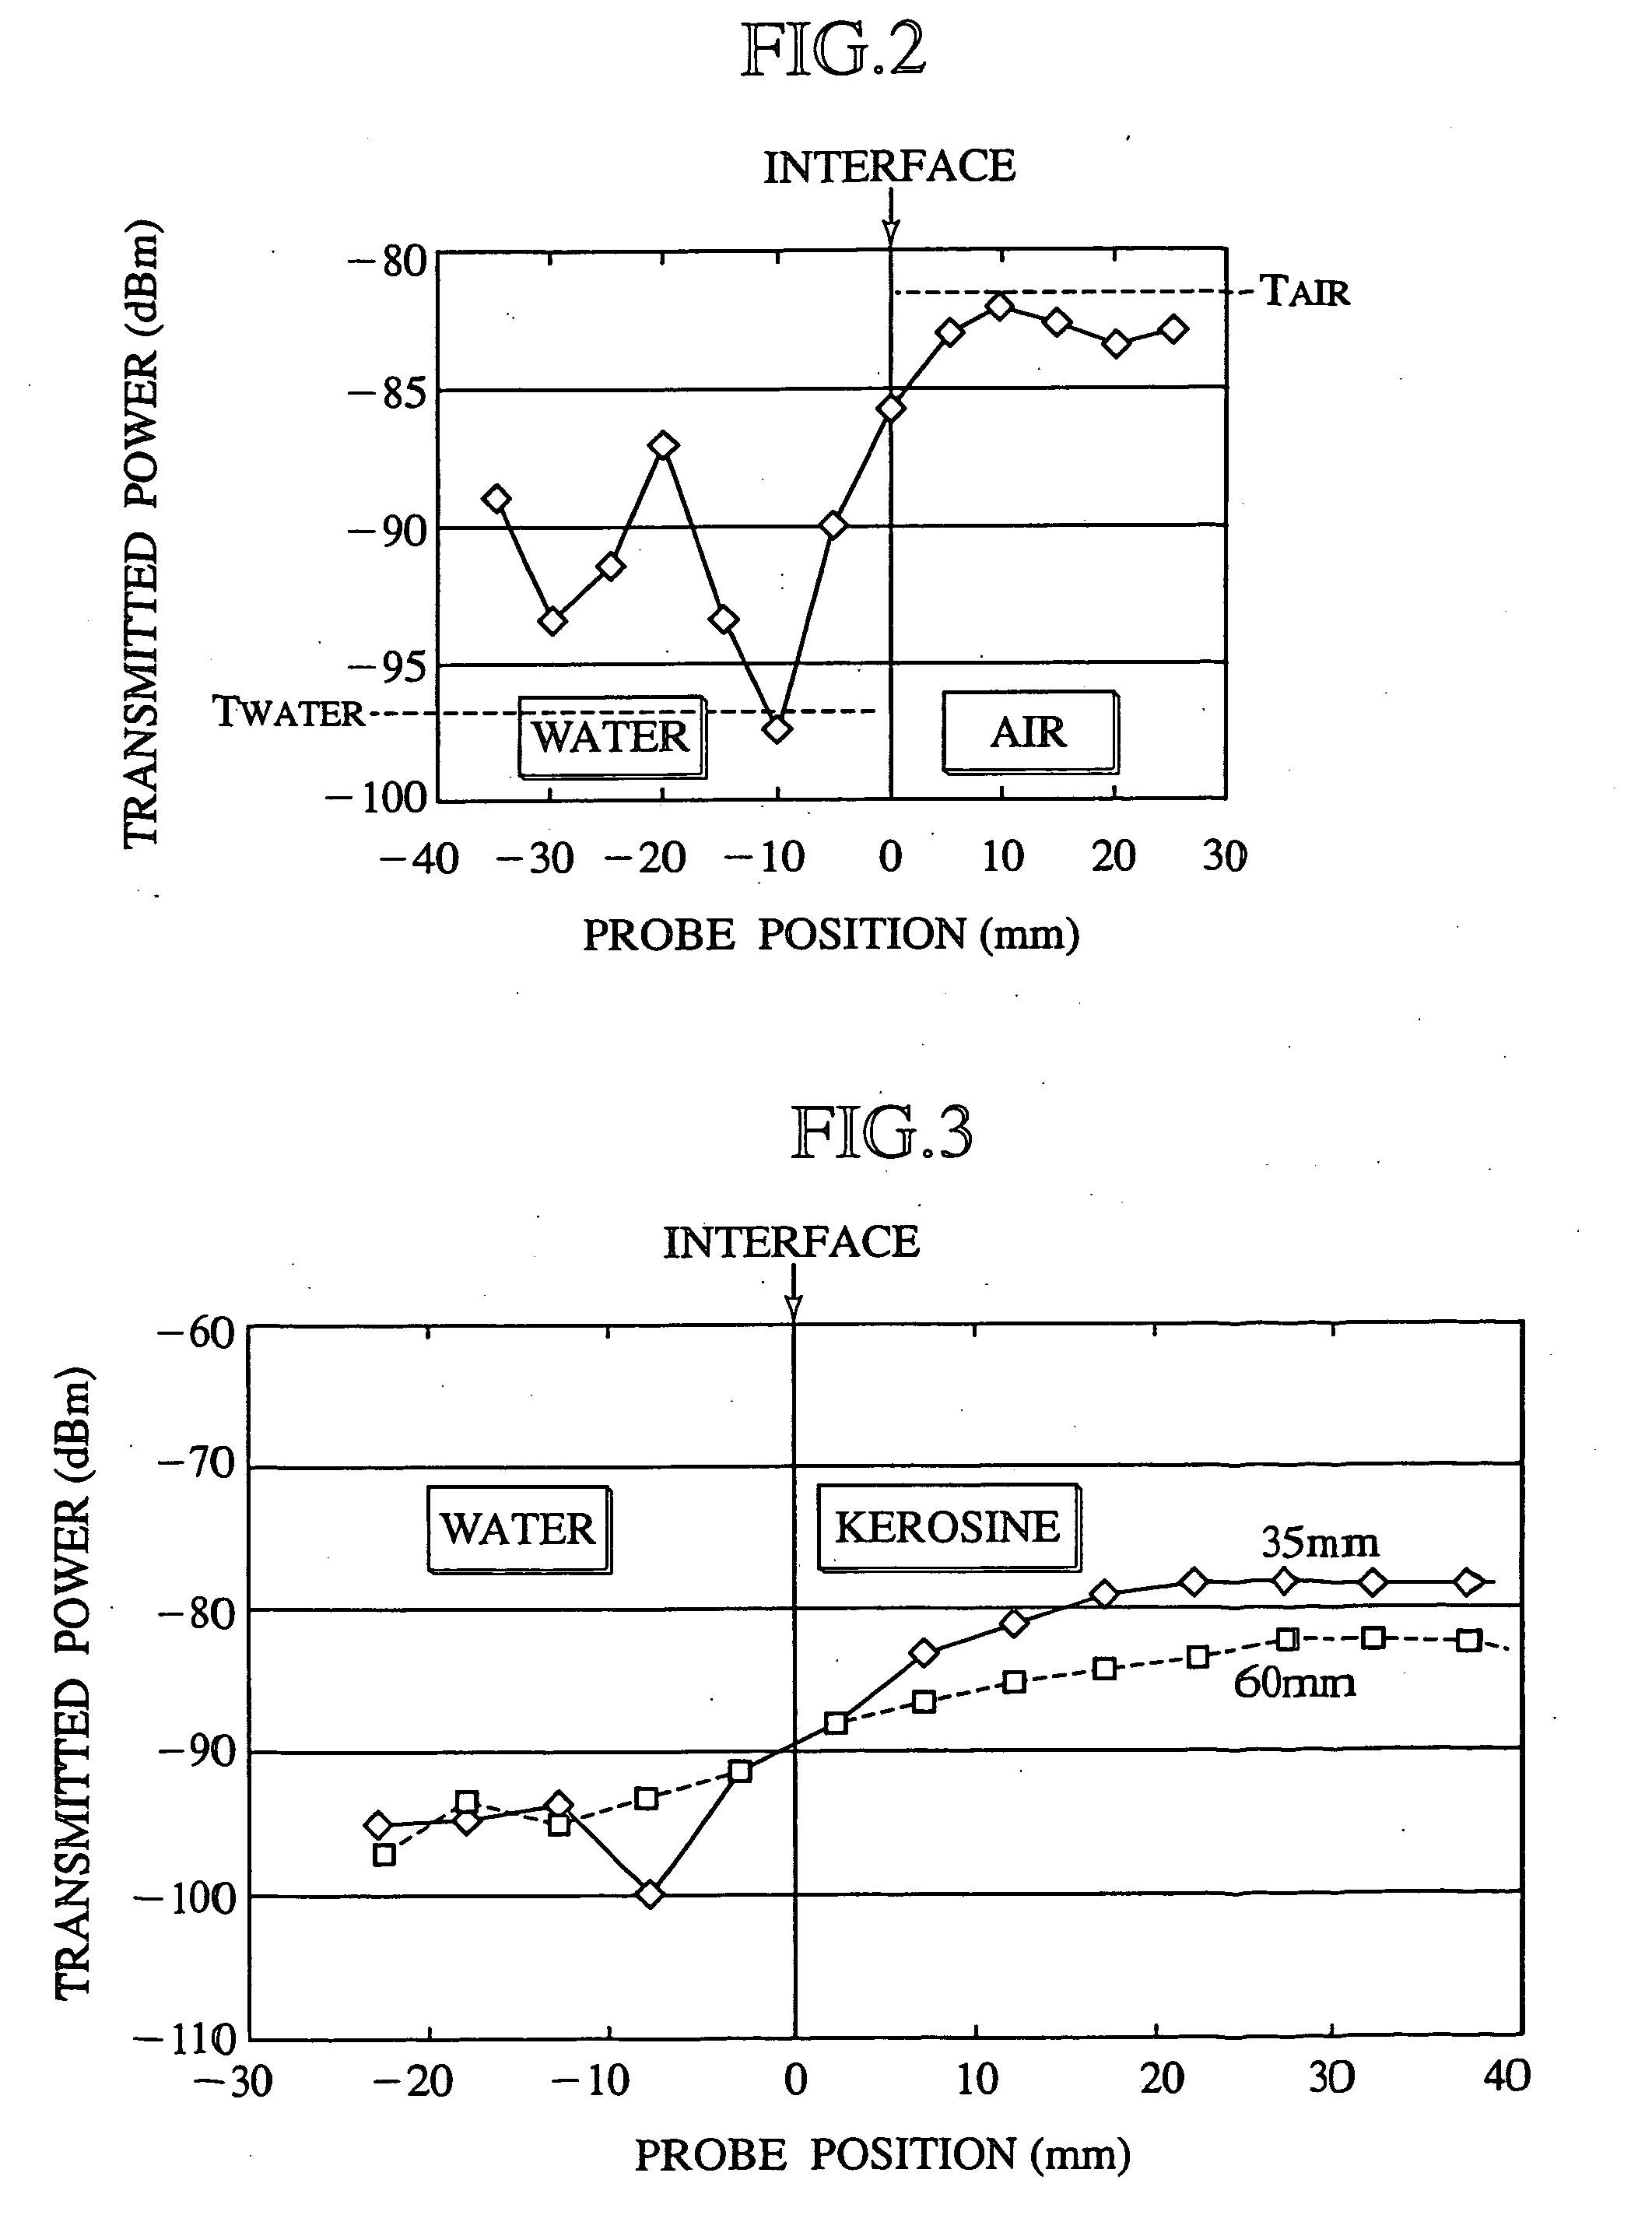 Interface detection apparatus and method for detecting hidden interface using microwave